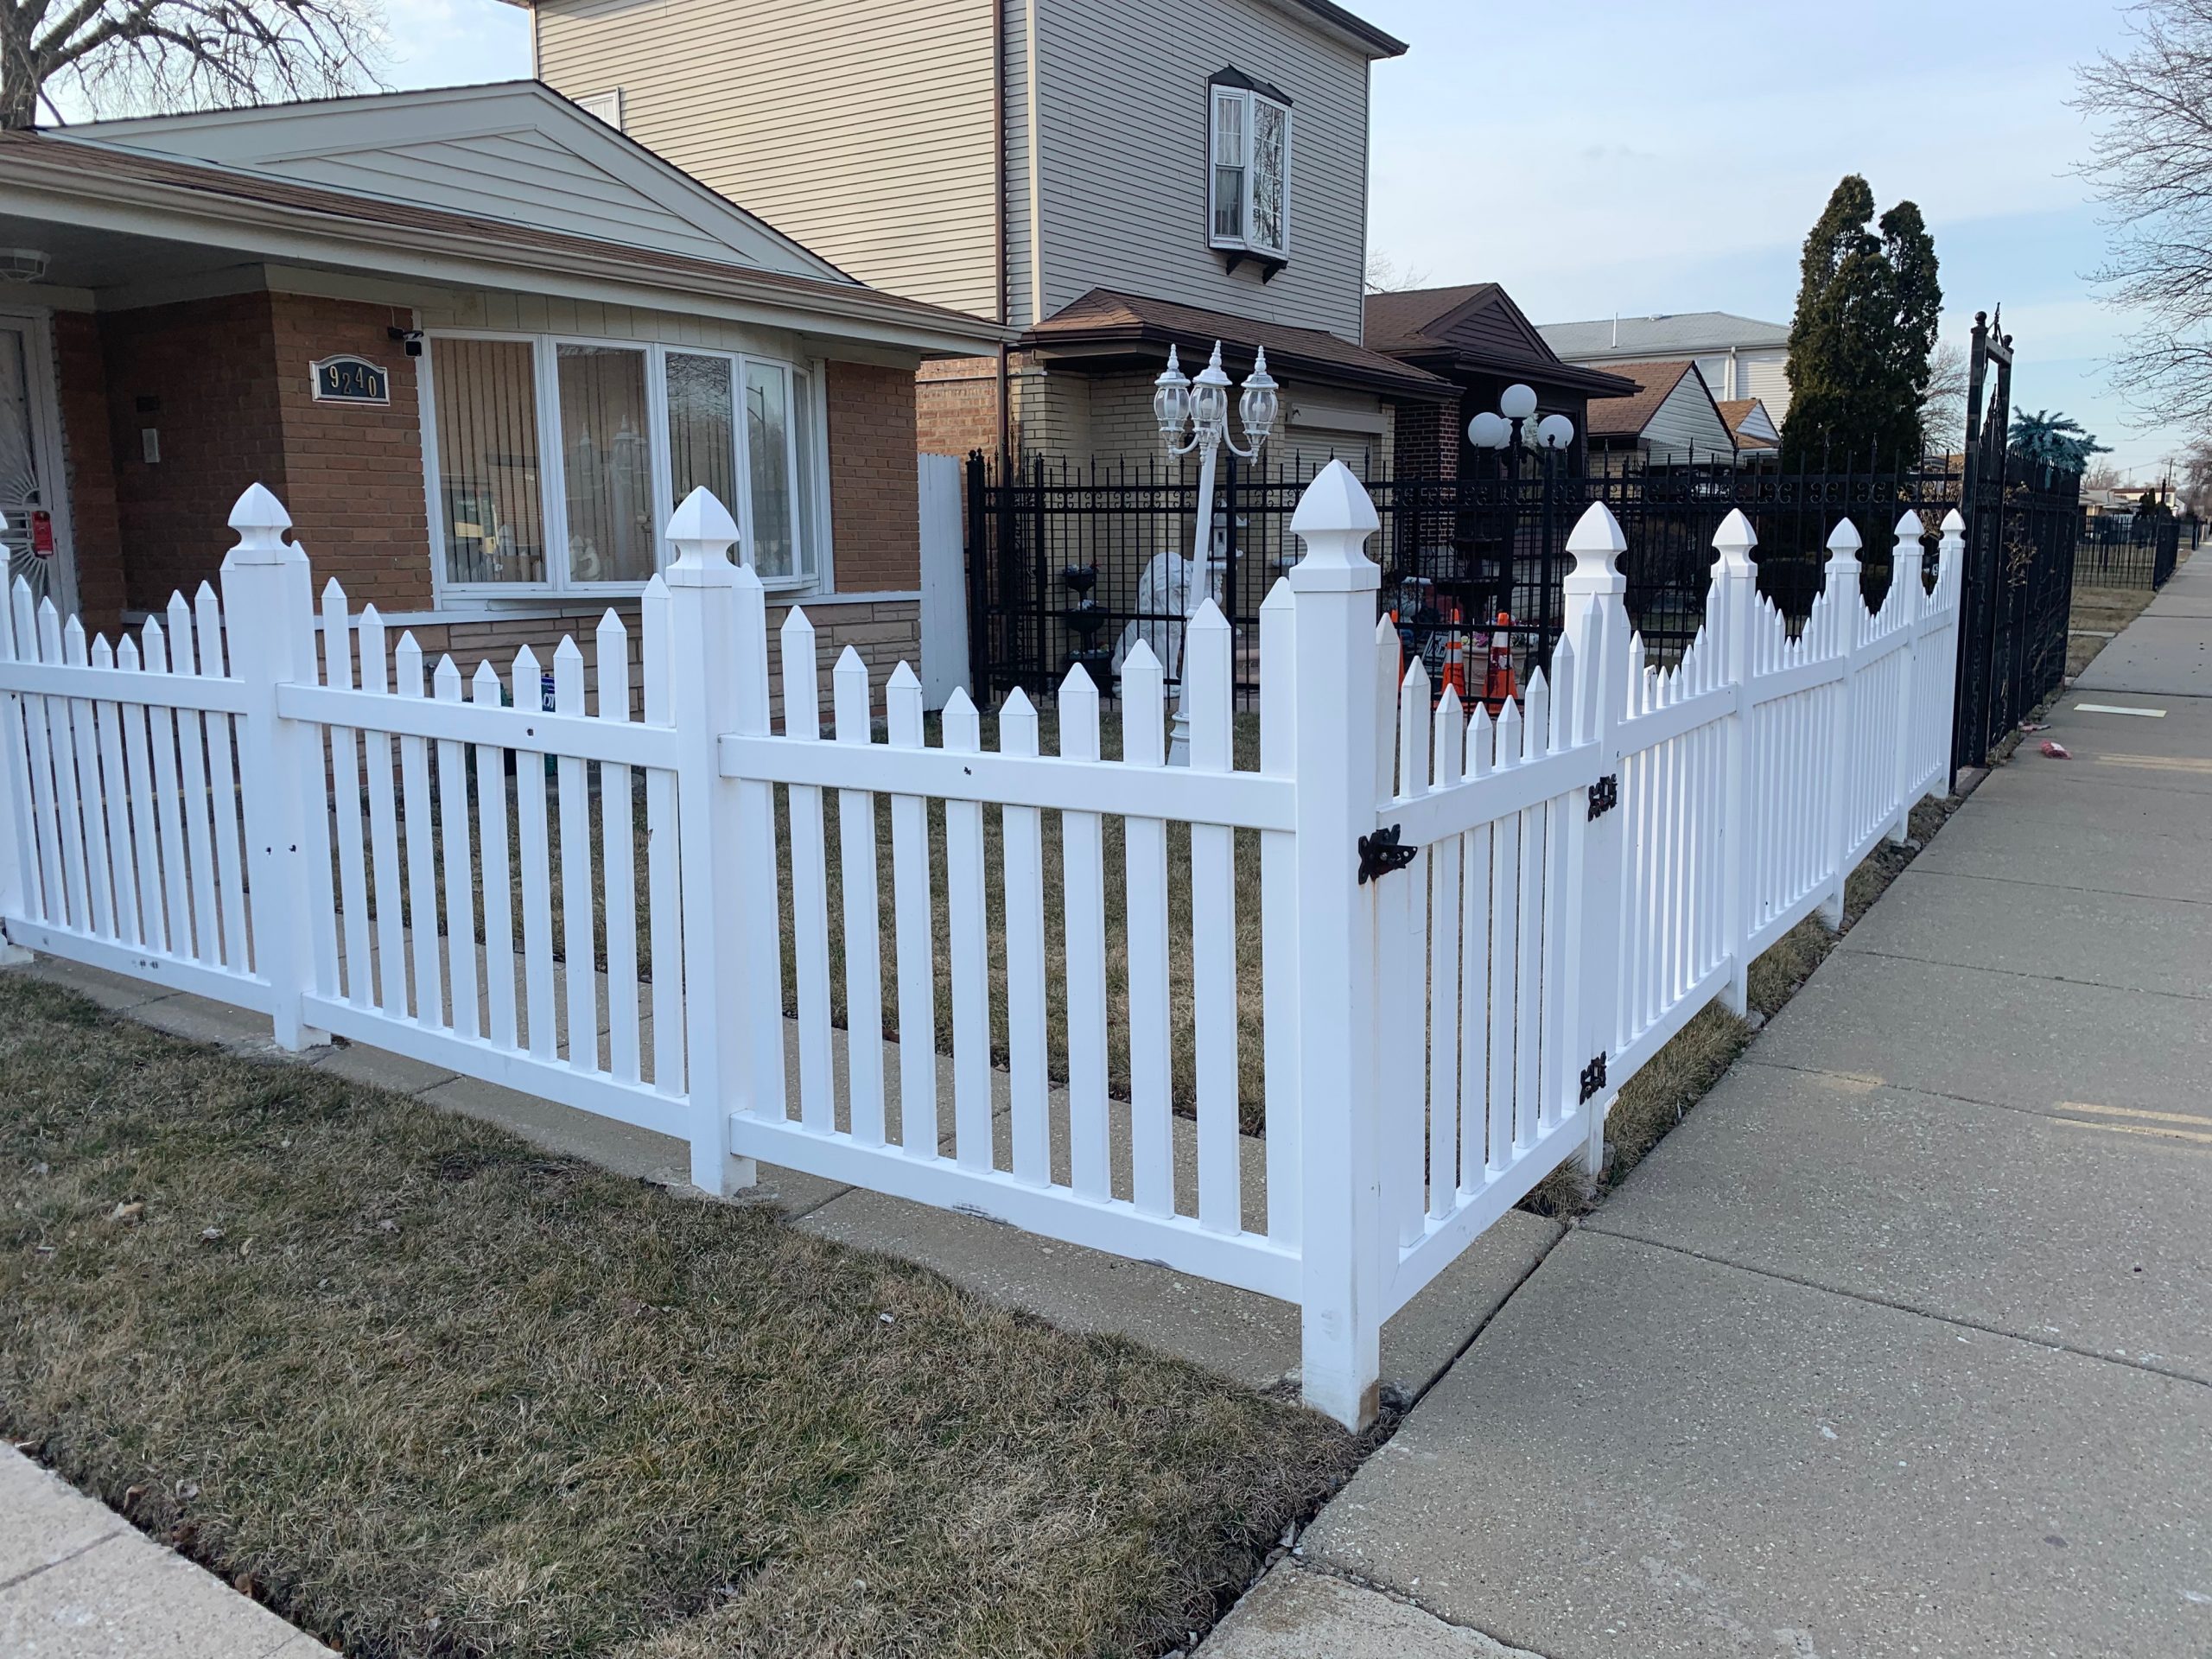 What Are The Best Porch Railings Materials?